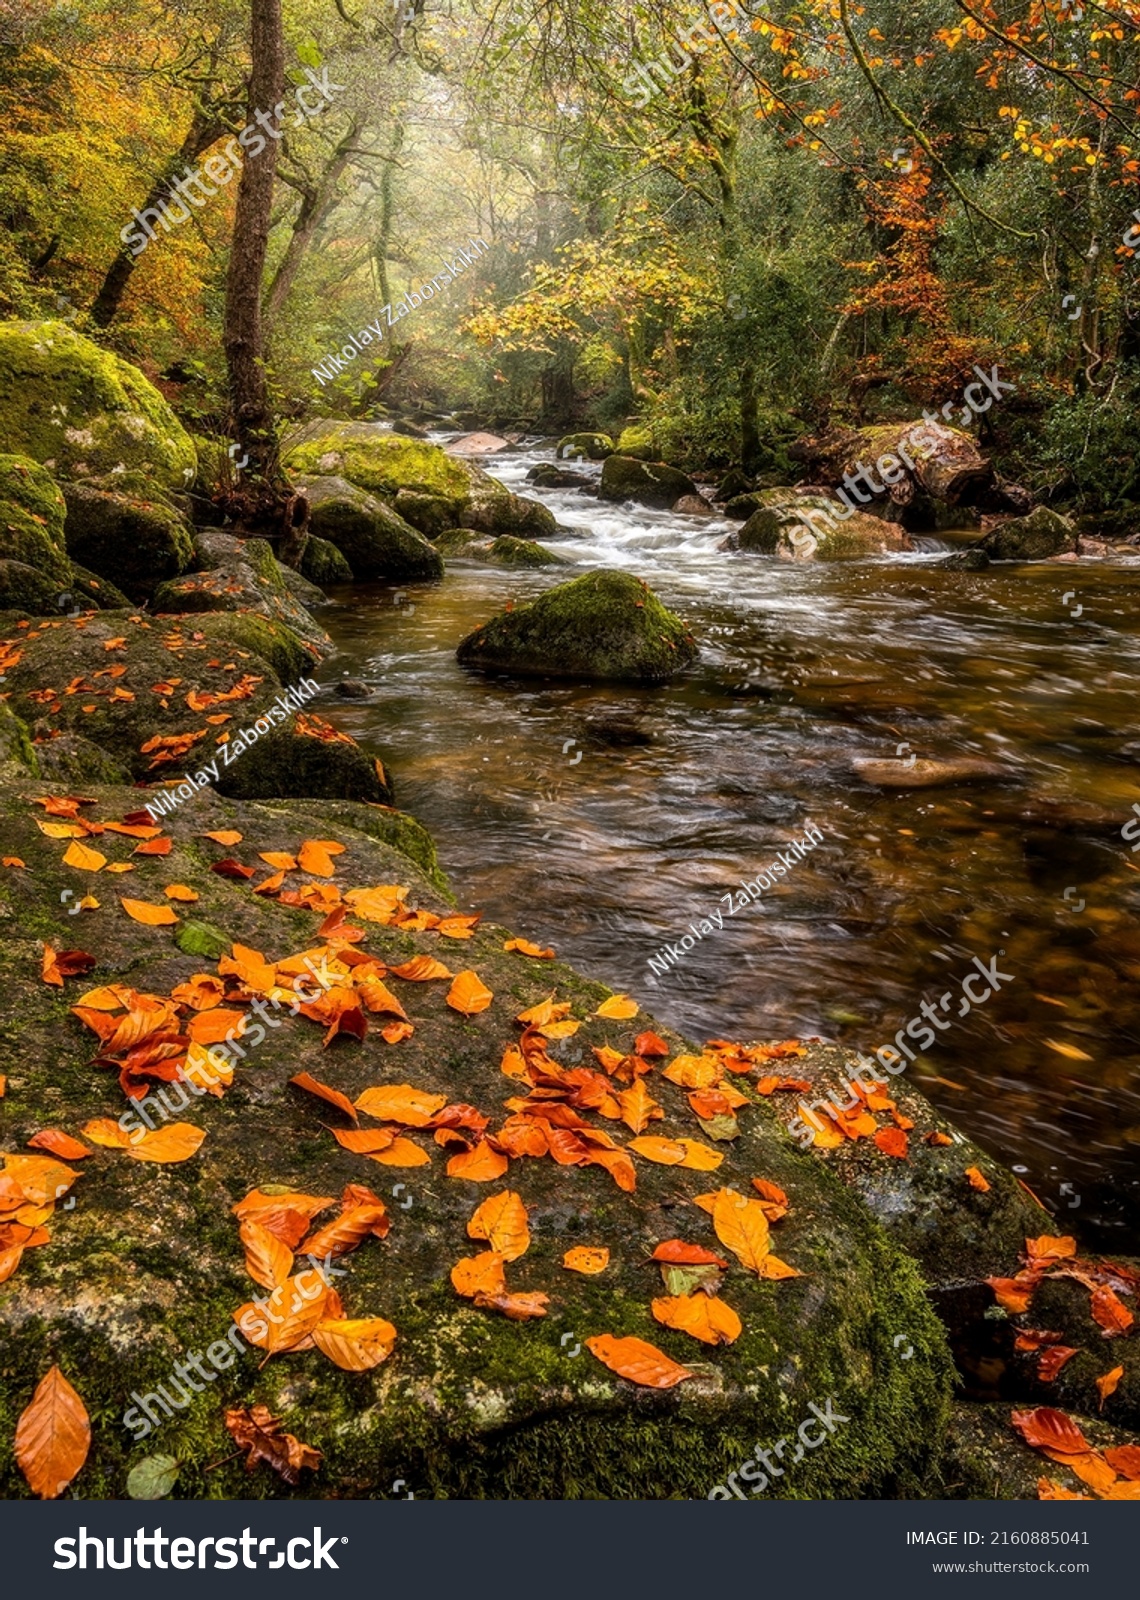 Fallen autumn leaves by a forest river creeks. Autumn river creeks #2160885041